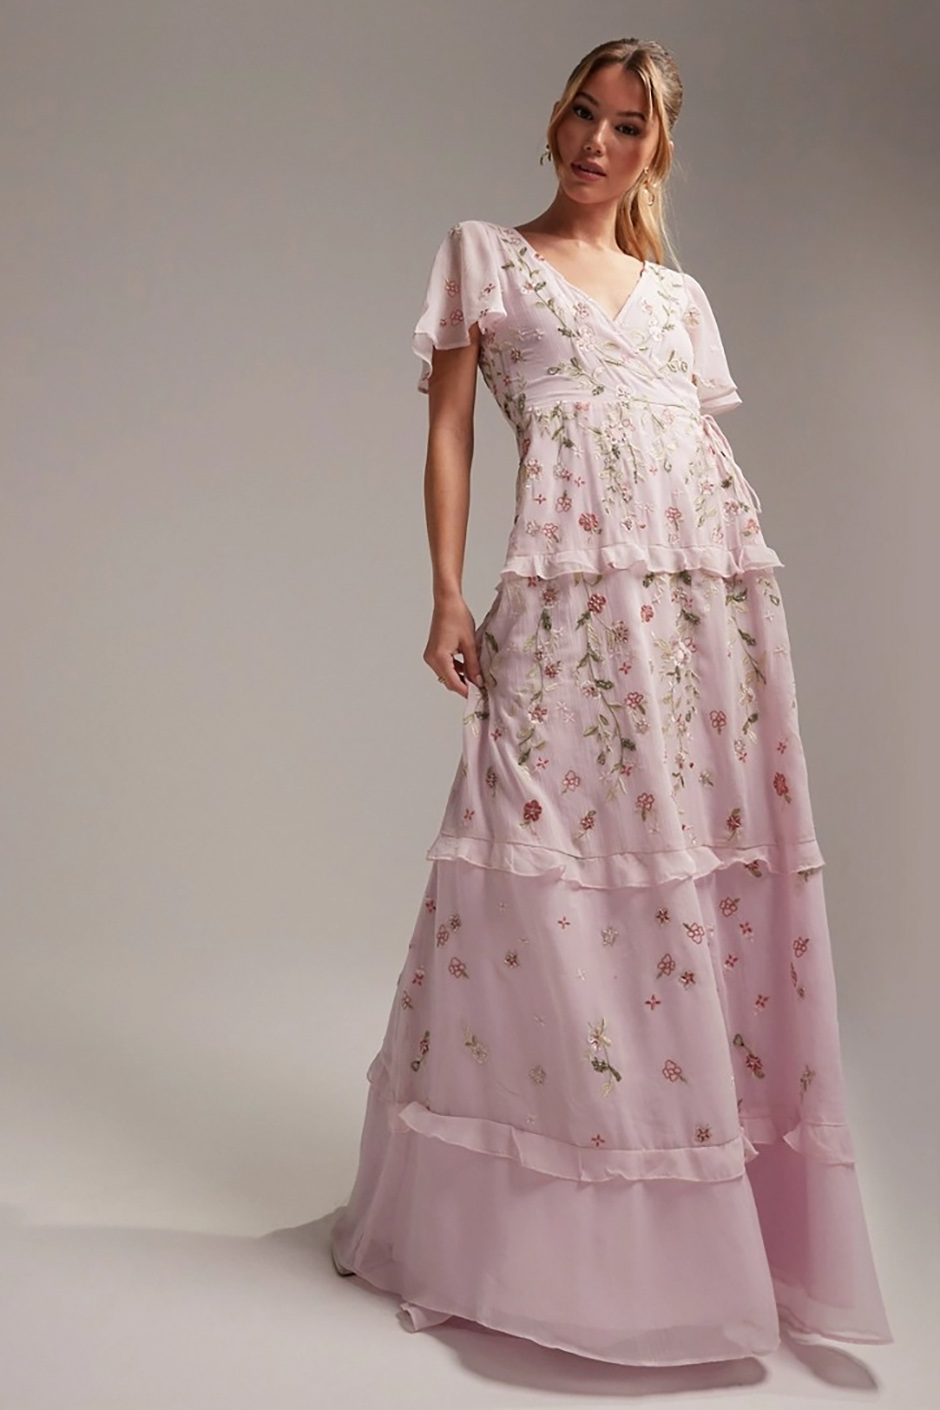 Spring bridesmaid dress from asos - wrap pink maxi dress with floral embroidery 